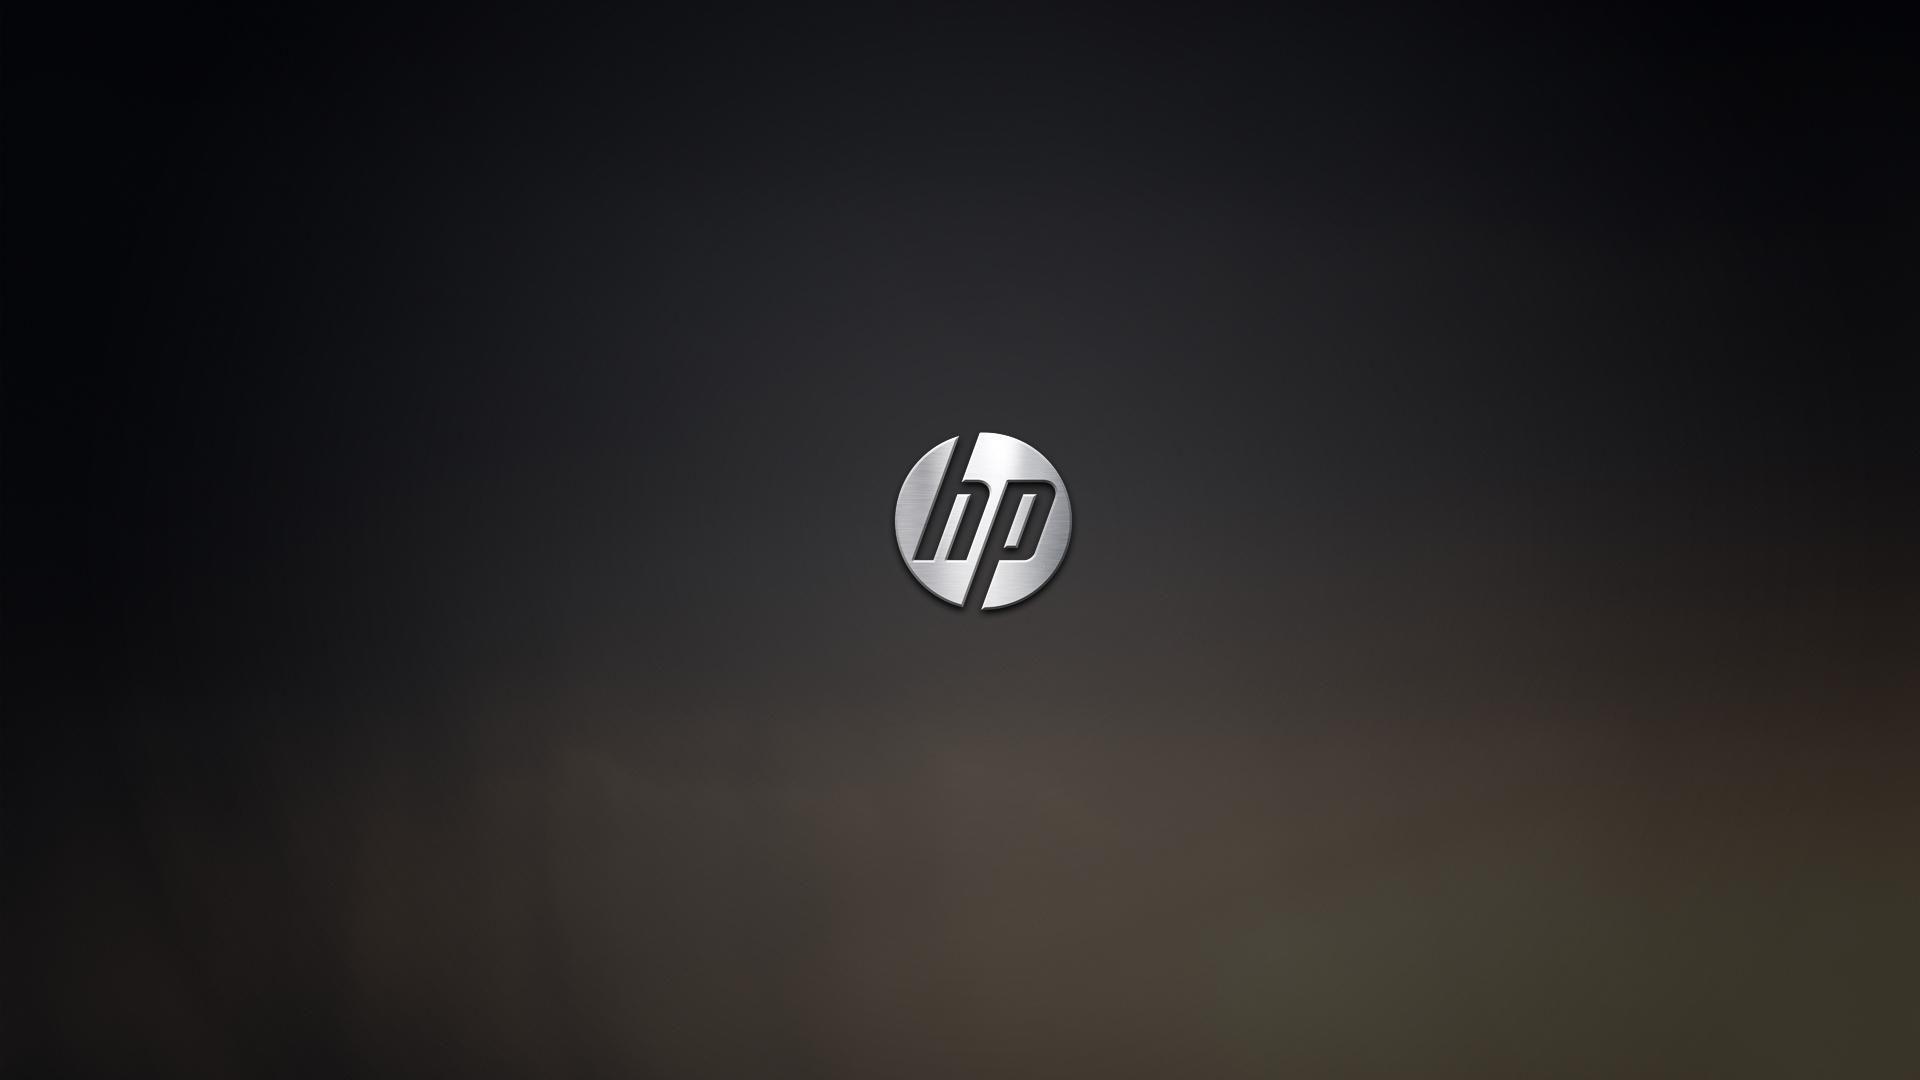 Image For > Hp Logo Wallpapers